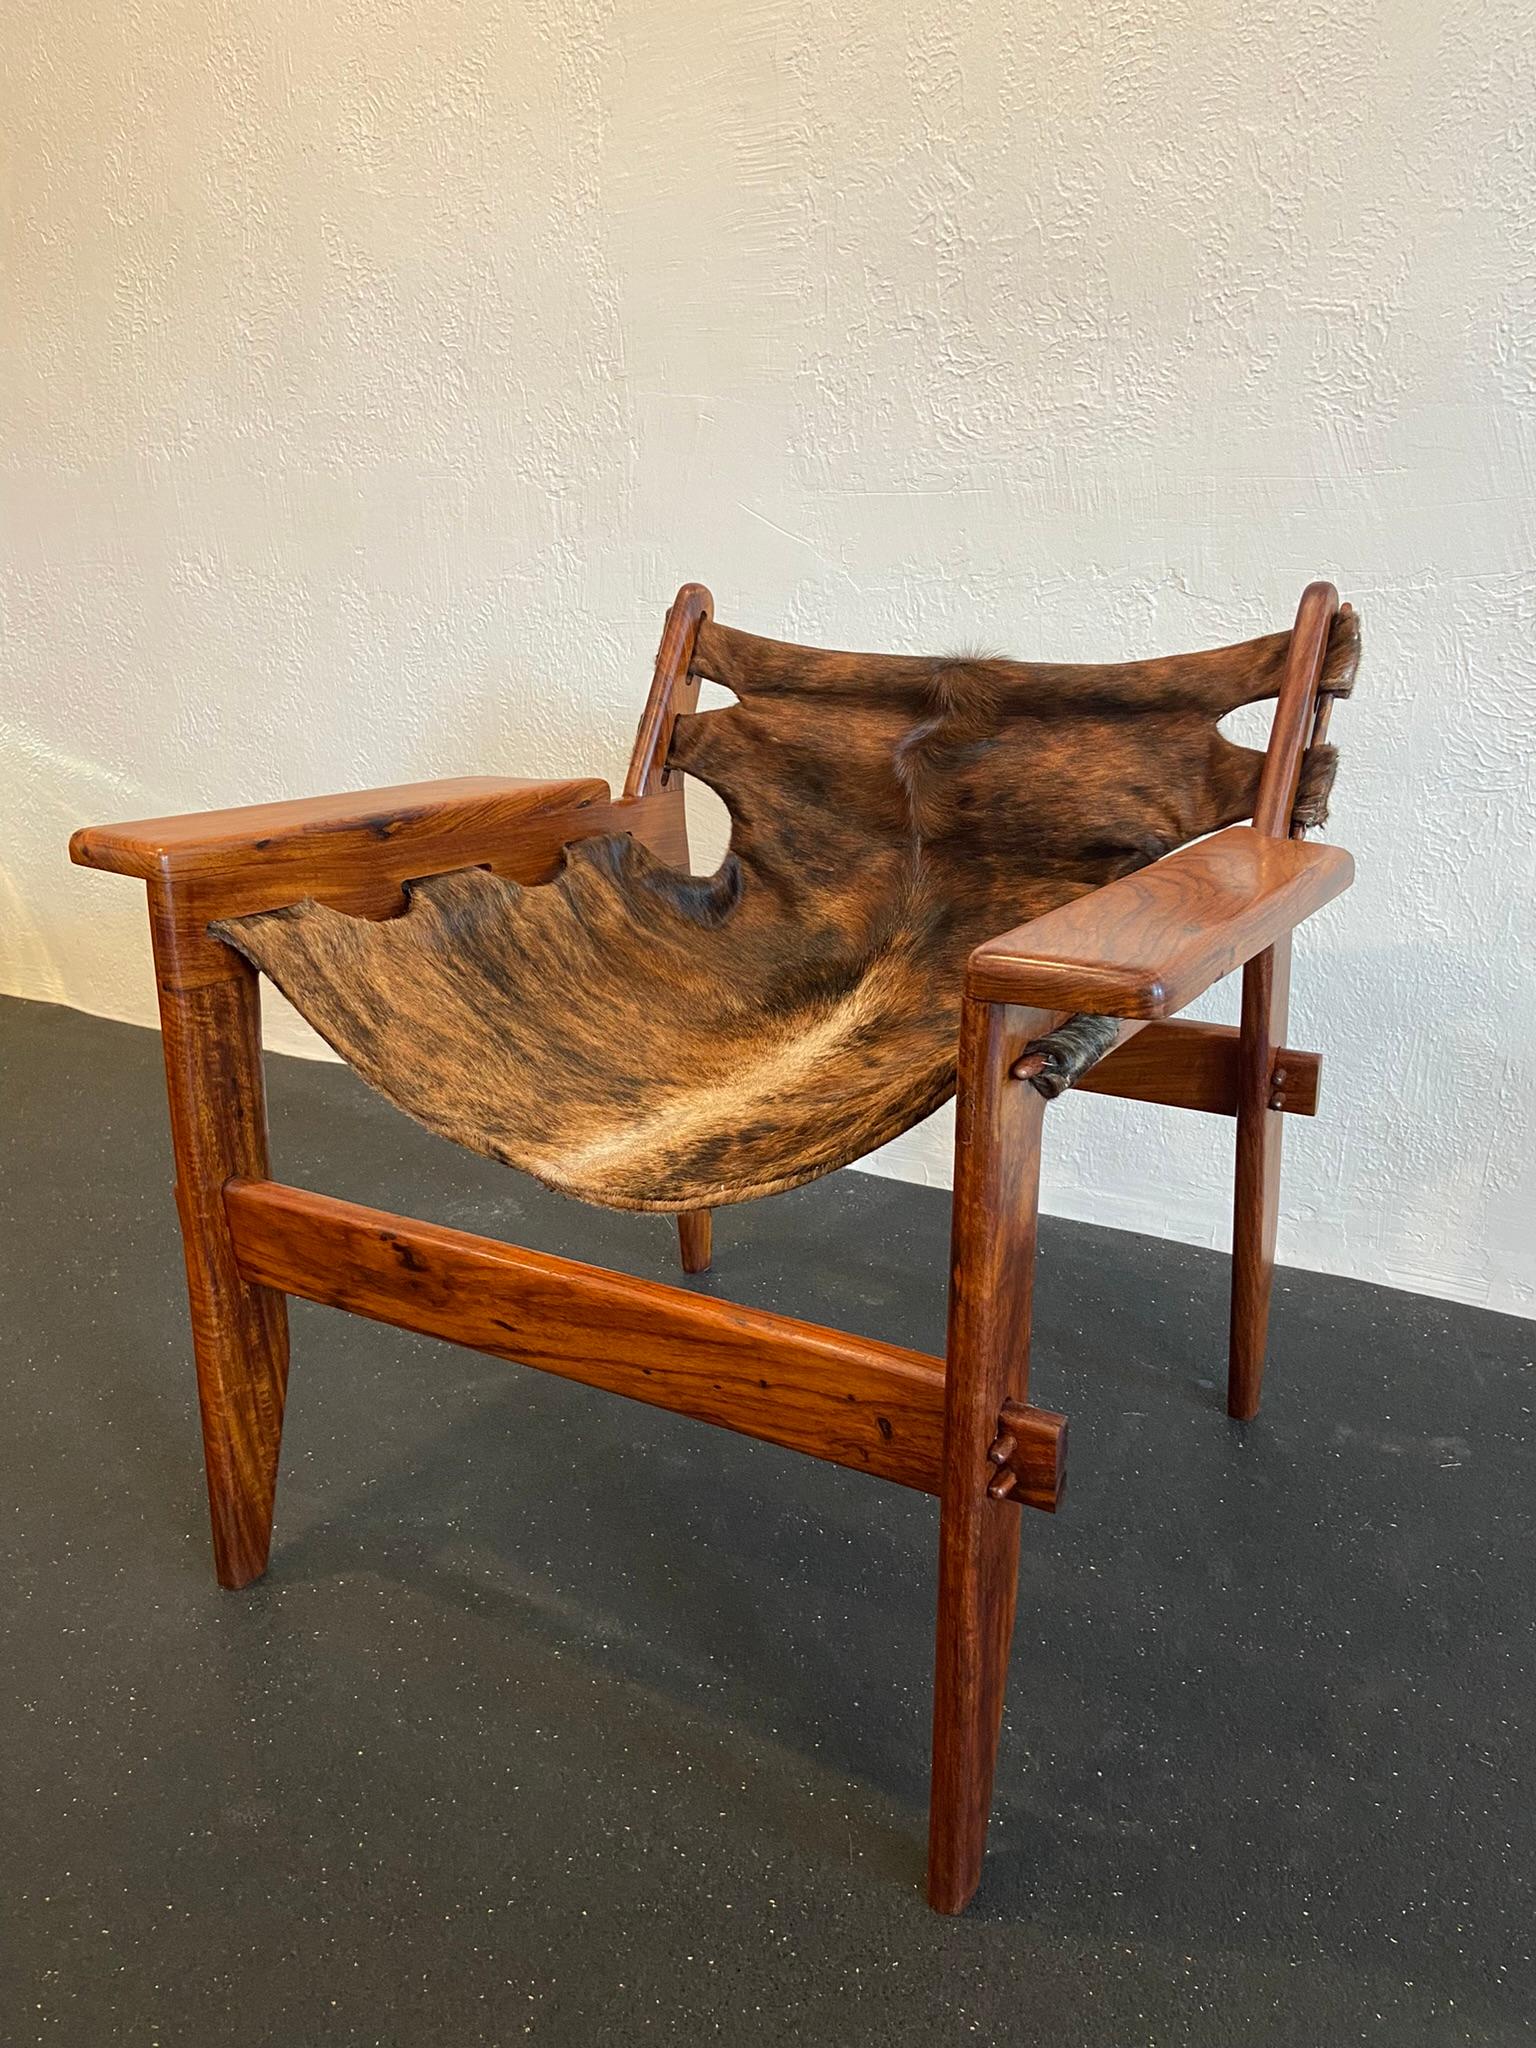 Sergio Rodrigues style rosewood sling chair. The frame has been refinished and the sling updated to an exotic hair on hide. Design is reminiscent of the Kilin chair by Sergio Rodrigues. 

Would work well in a variety of interiors such as modern,